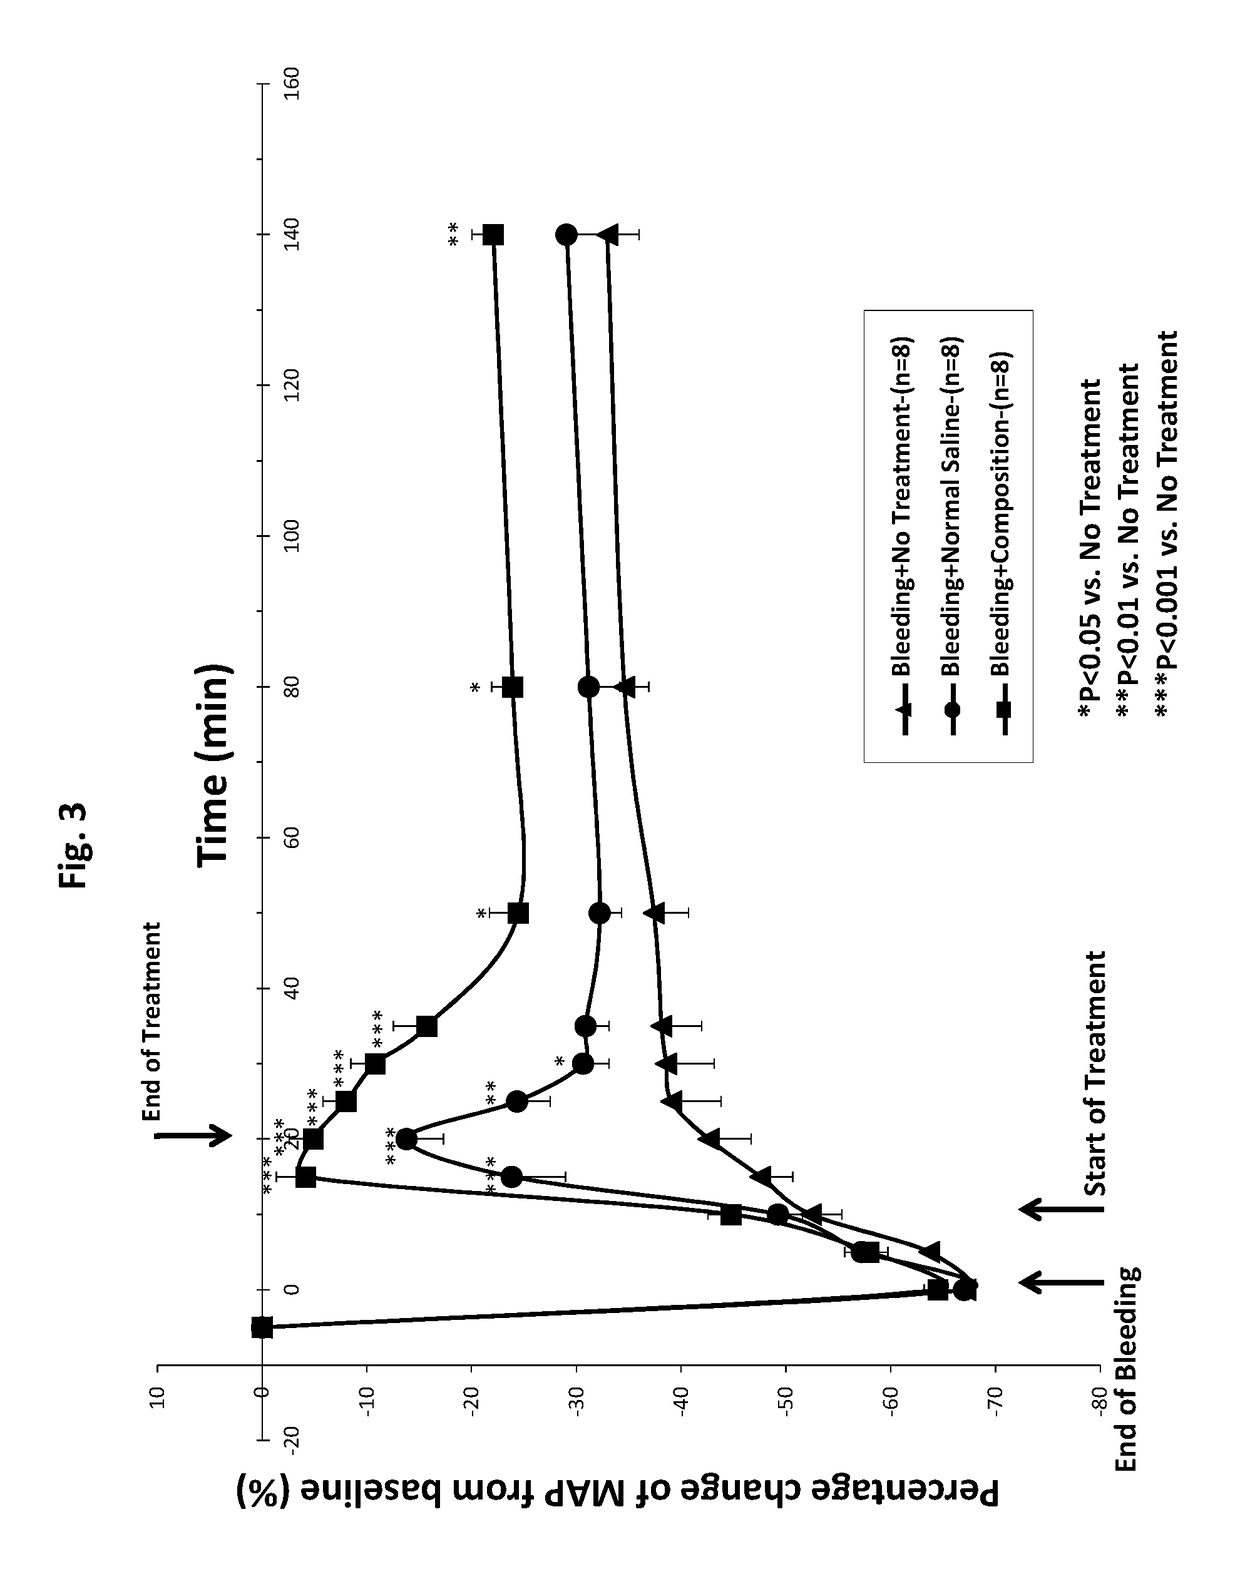 Composition and methods for treatment of loss of fluids leading to hypotension and/or hypovolemia